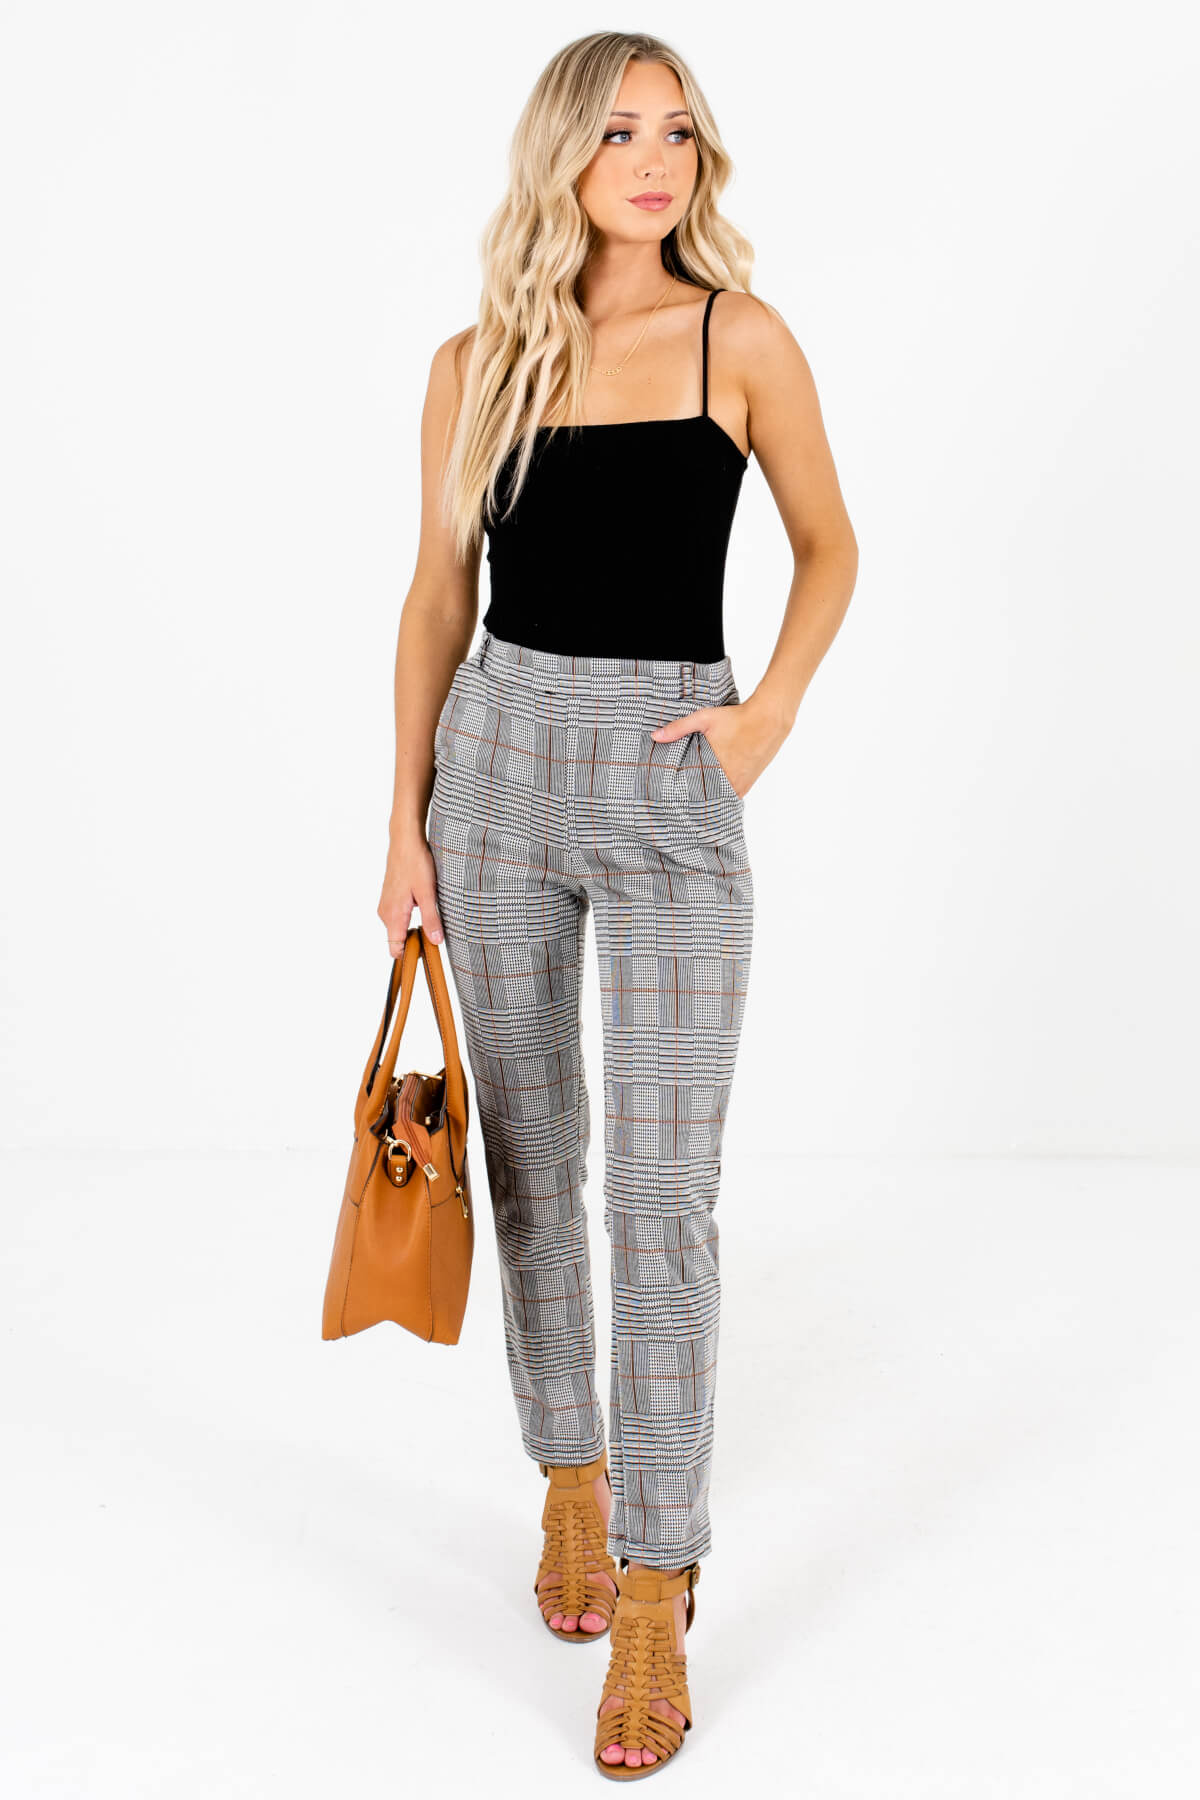 Grey Check Slim Leg Pants #grey #check #trousers #greychecktrousers Grey  Check Slim Leg Pants Give your smart ca… | Smart casual dress, Smart casual  outfit, Clothes